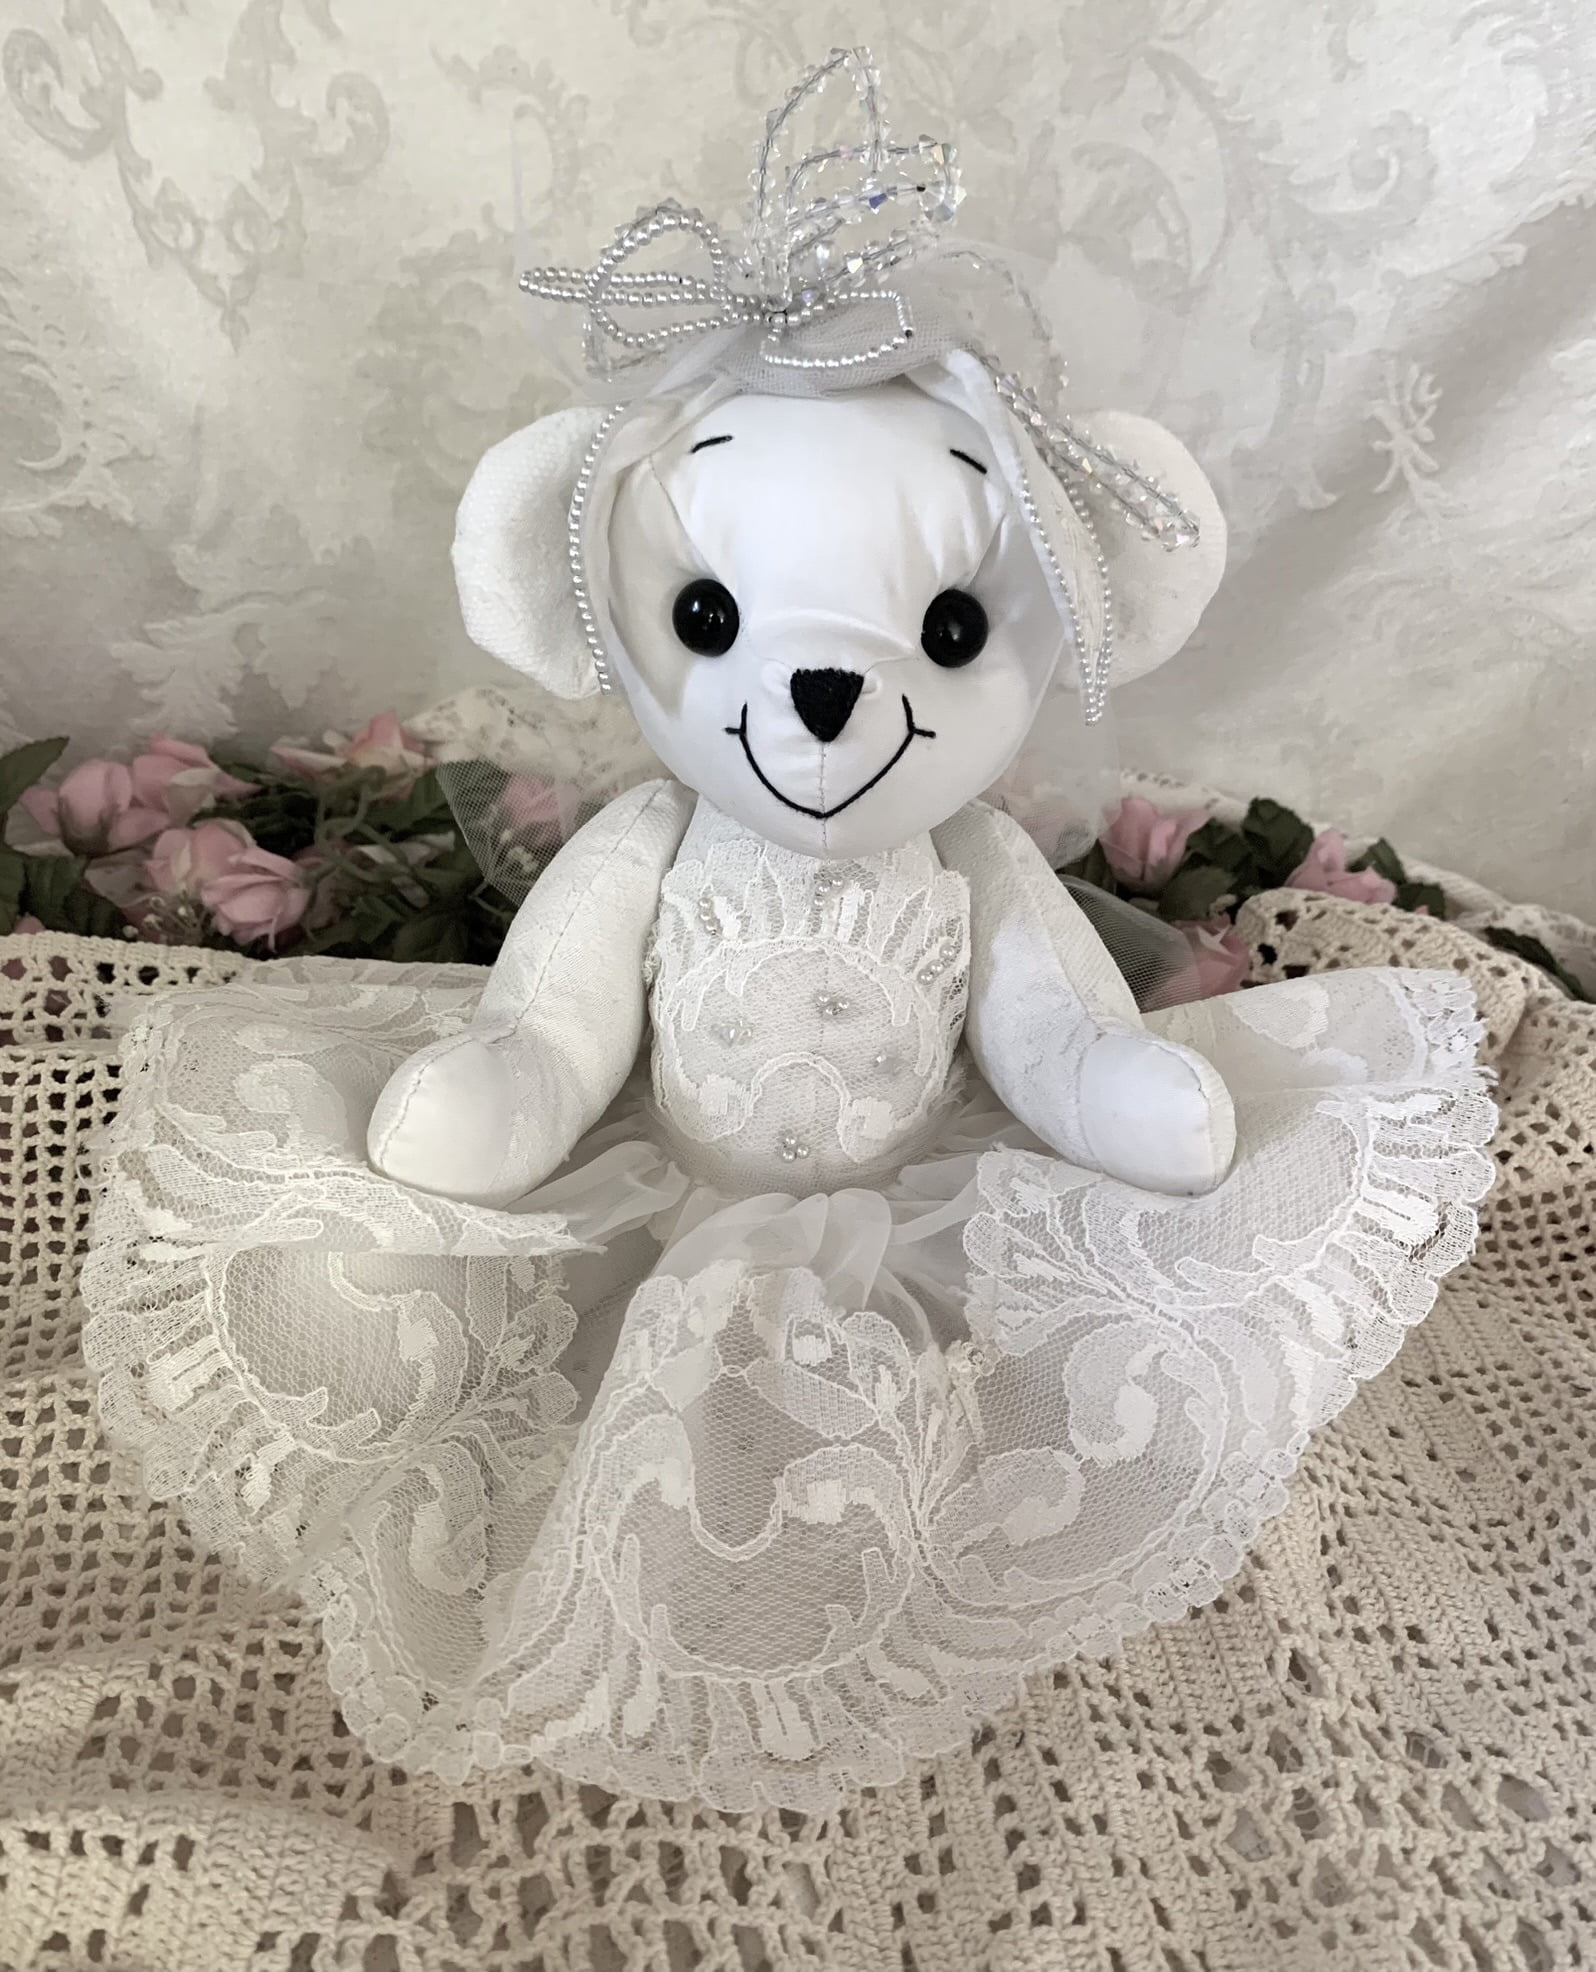 Bear made from wedding dress with sequin veil.